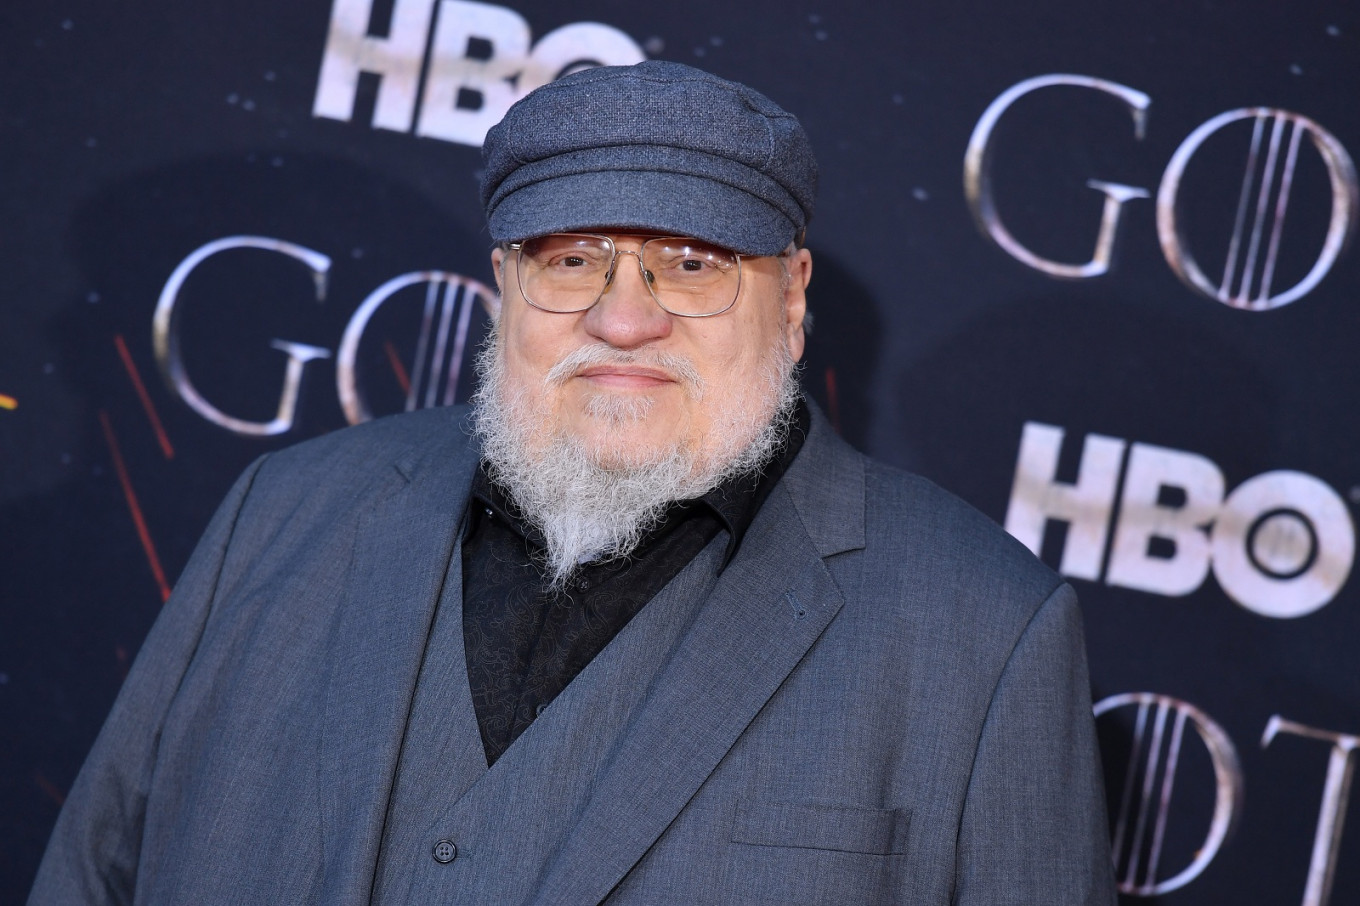 George R.R. Martin, Game of Thrones